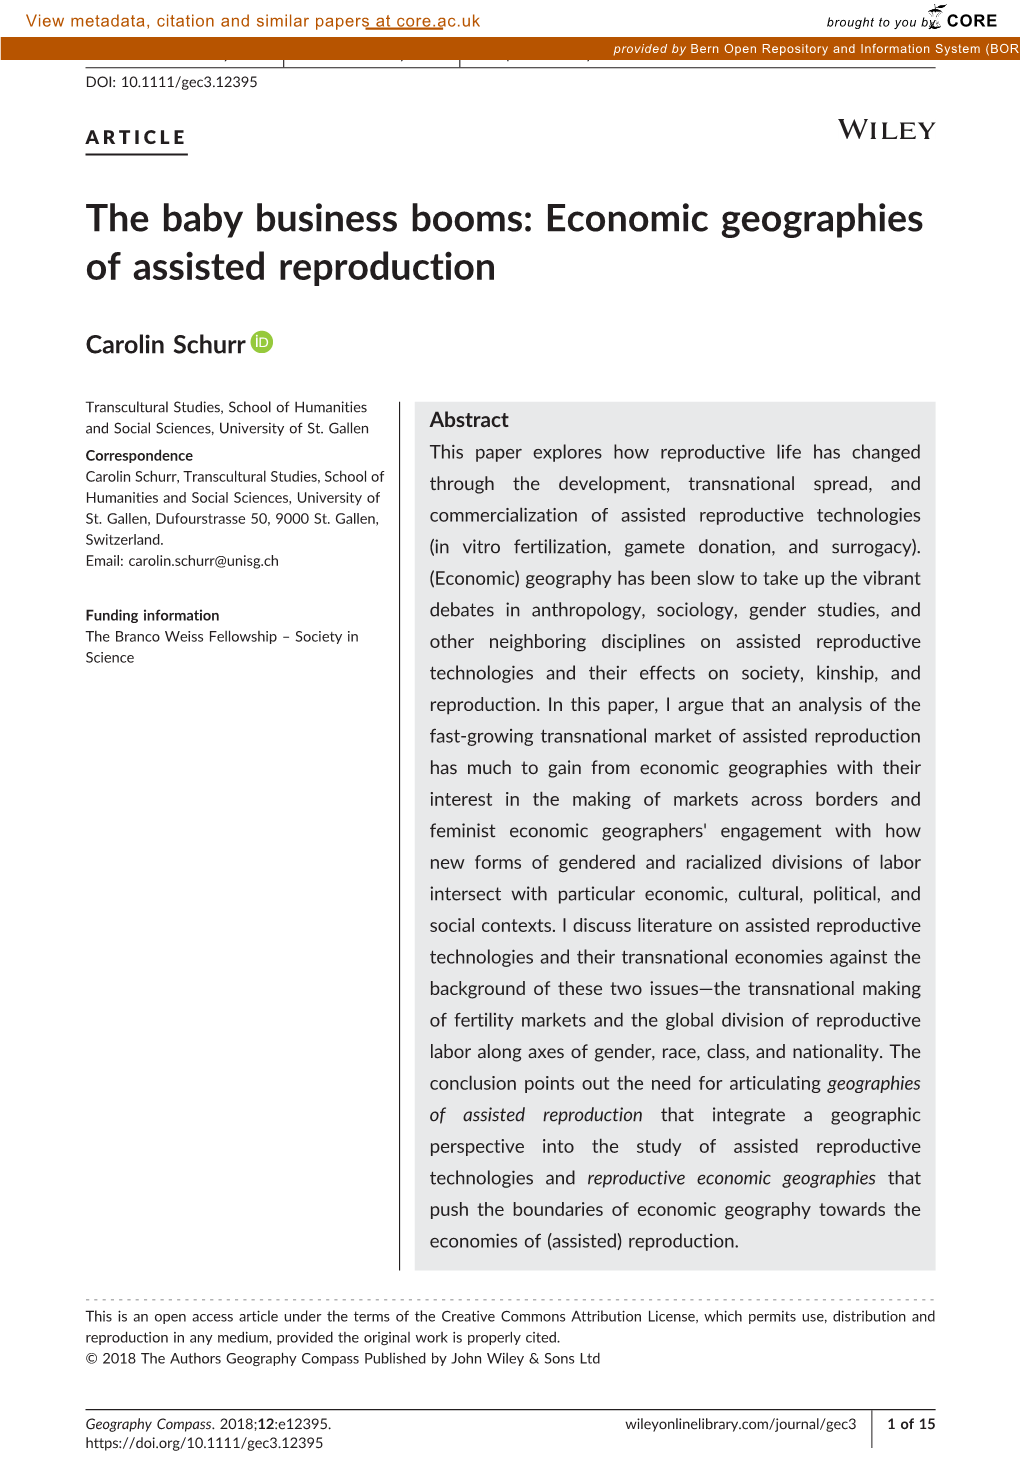 Economic Geographies of Assisted Reproduction